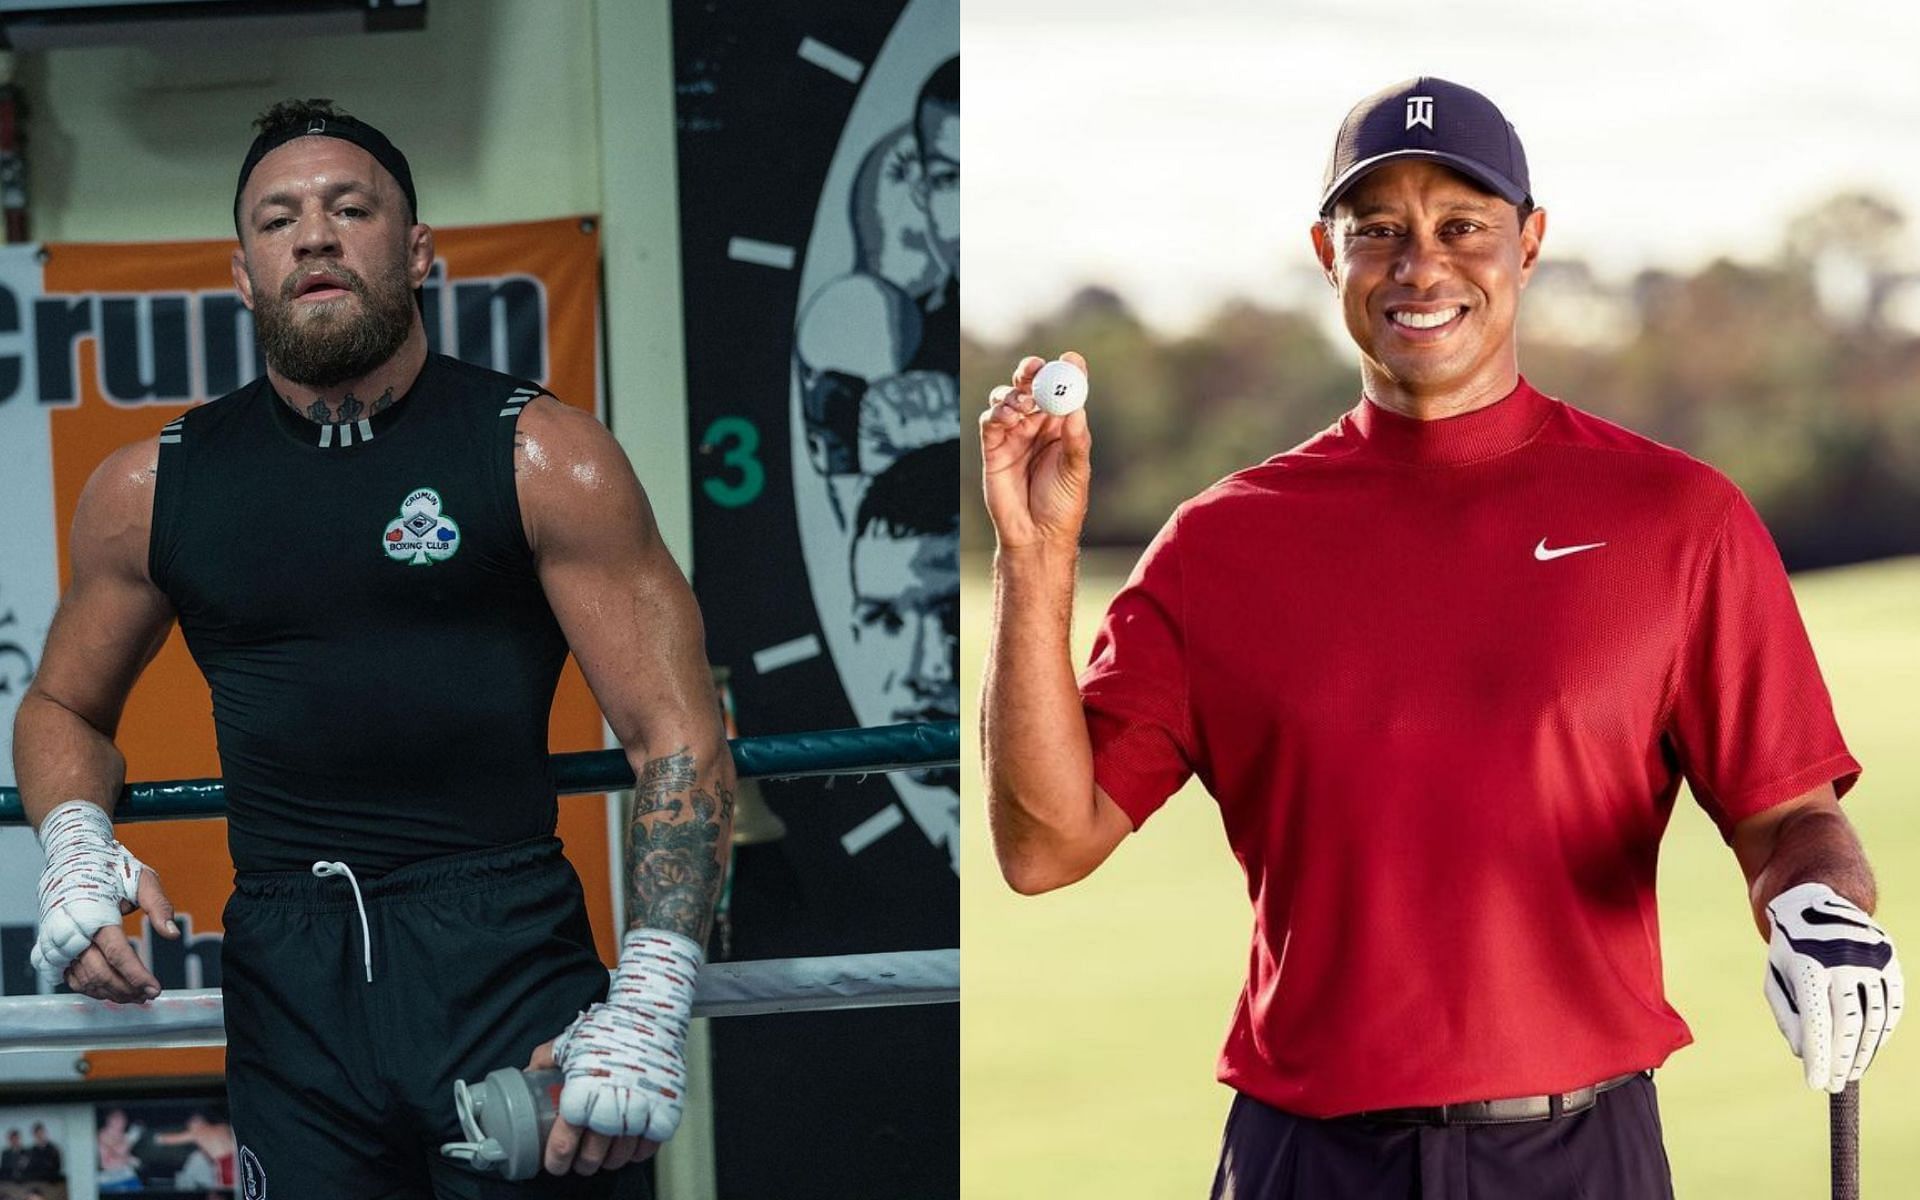 Conor McGregor (left) and Tiger Woods (right) [Images Courtesy: @thenotoriousmma and @tigerwoods on Instagram]